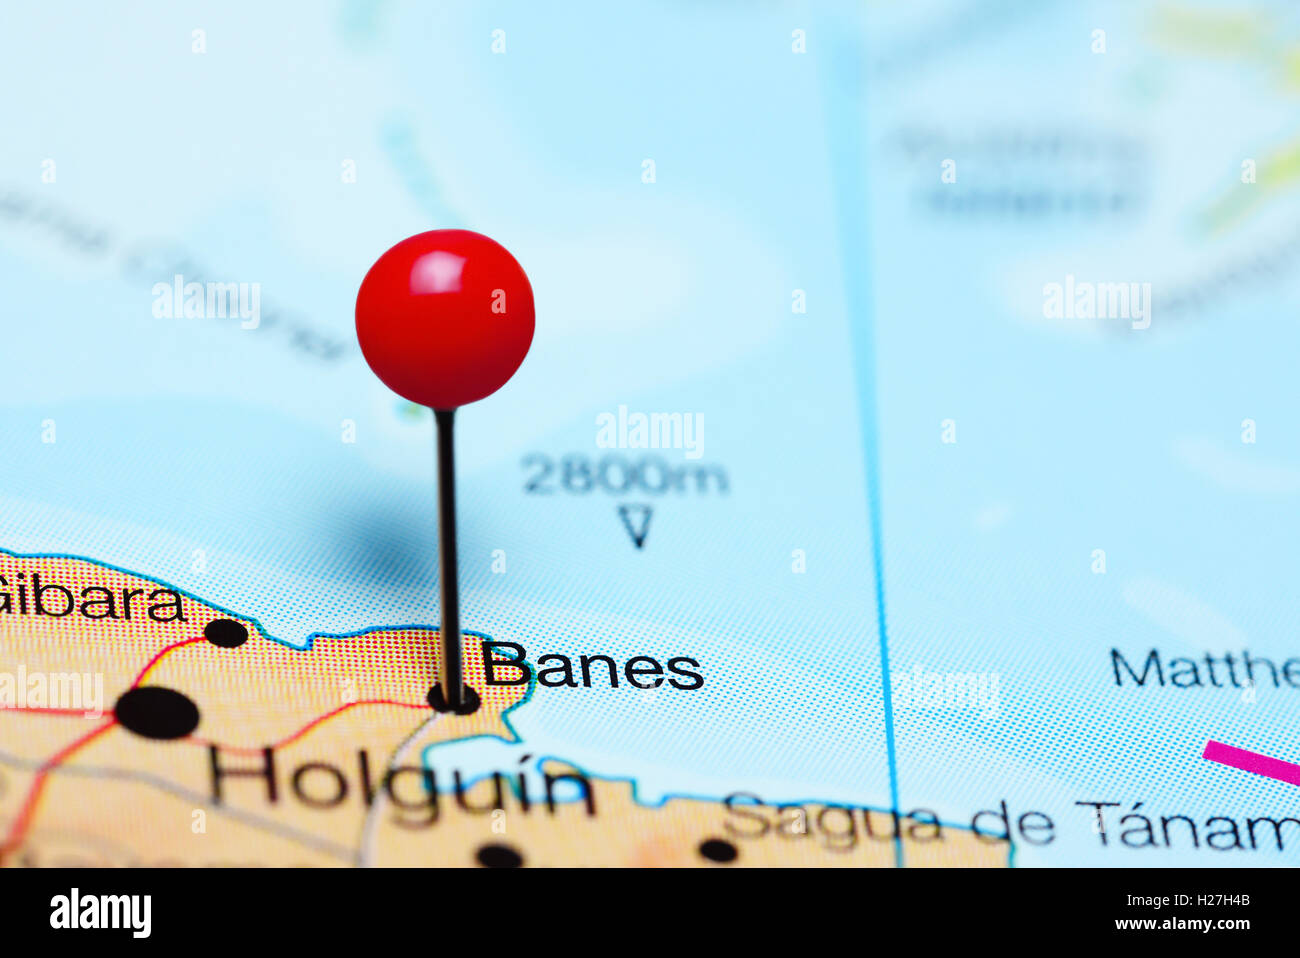 Banes pinned on a map of Cuba Stock Photo